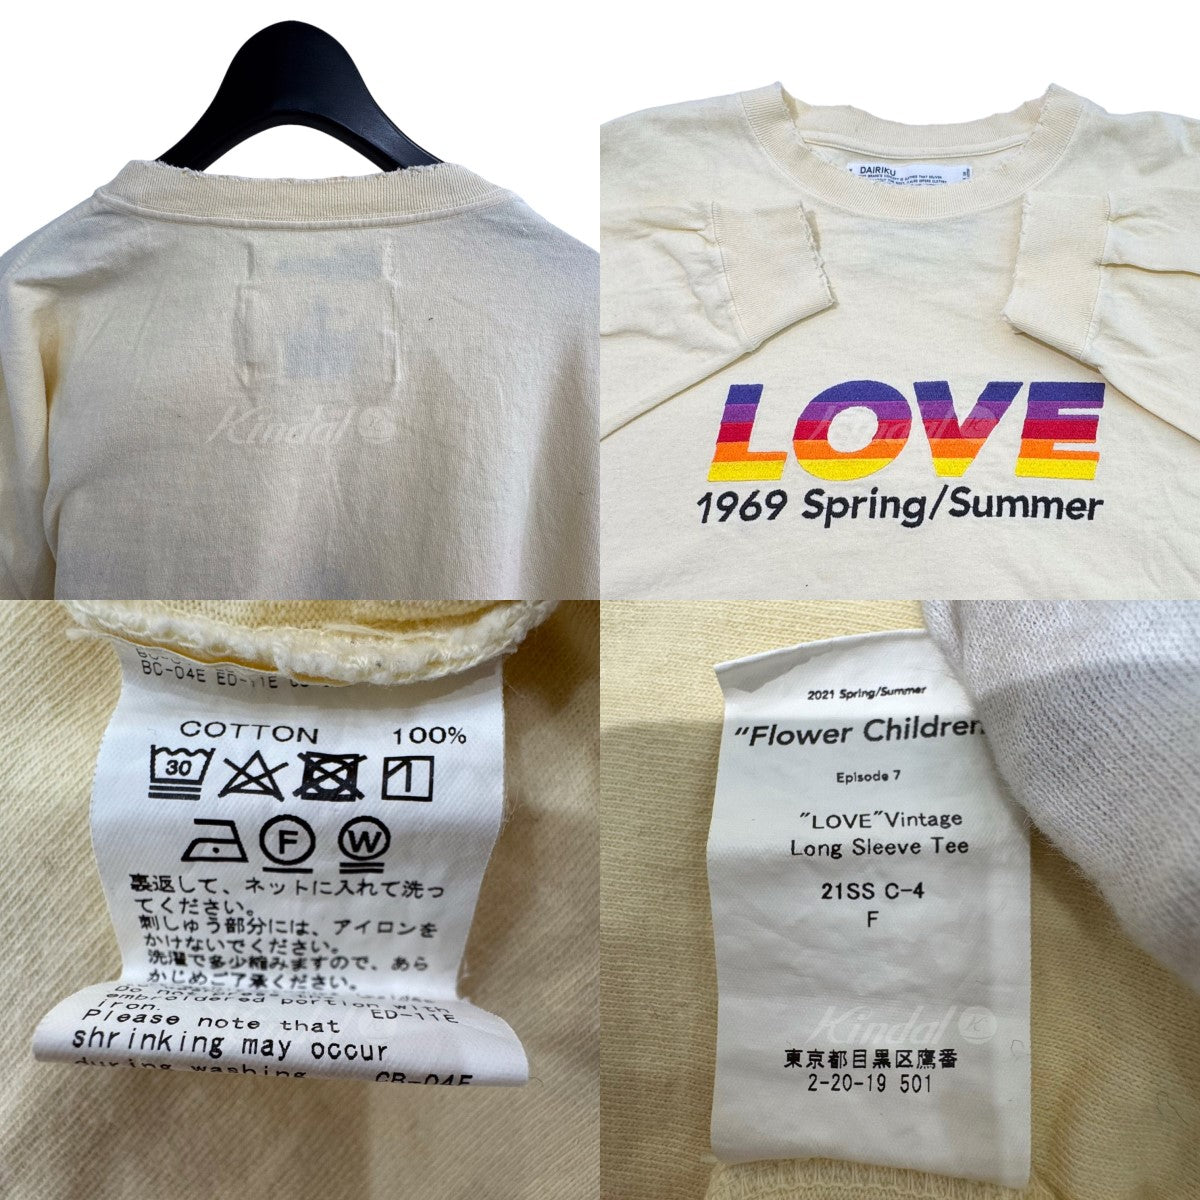 21SS「LOVE Vintage L／S Tee」 ロングスリーブ Tシャツ